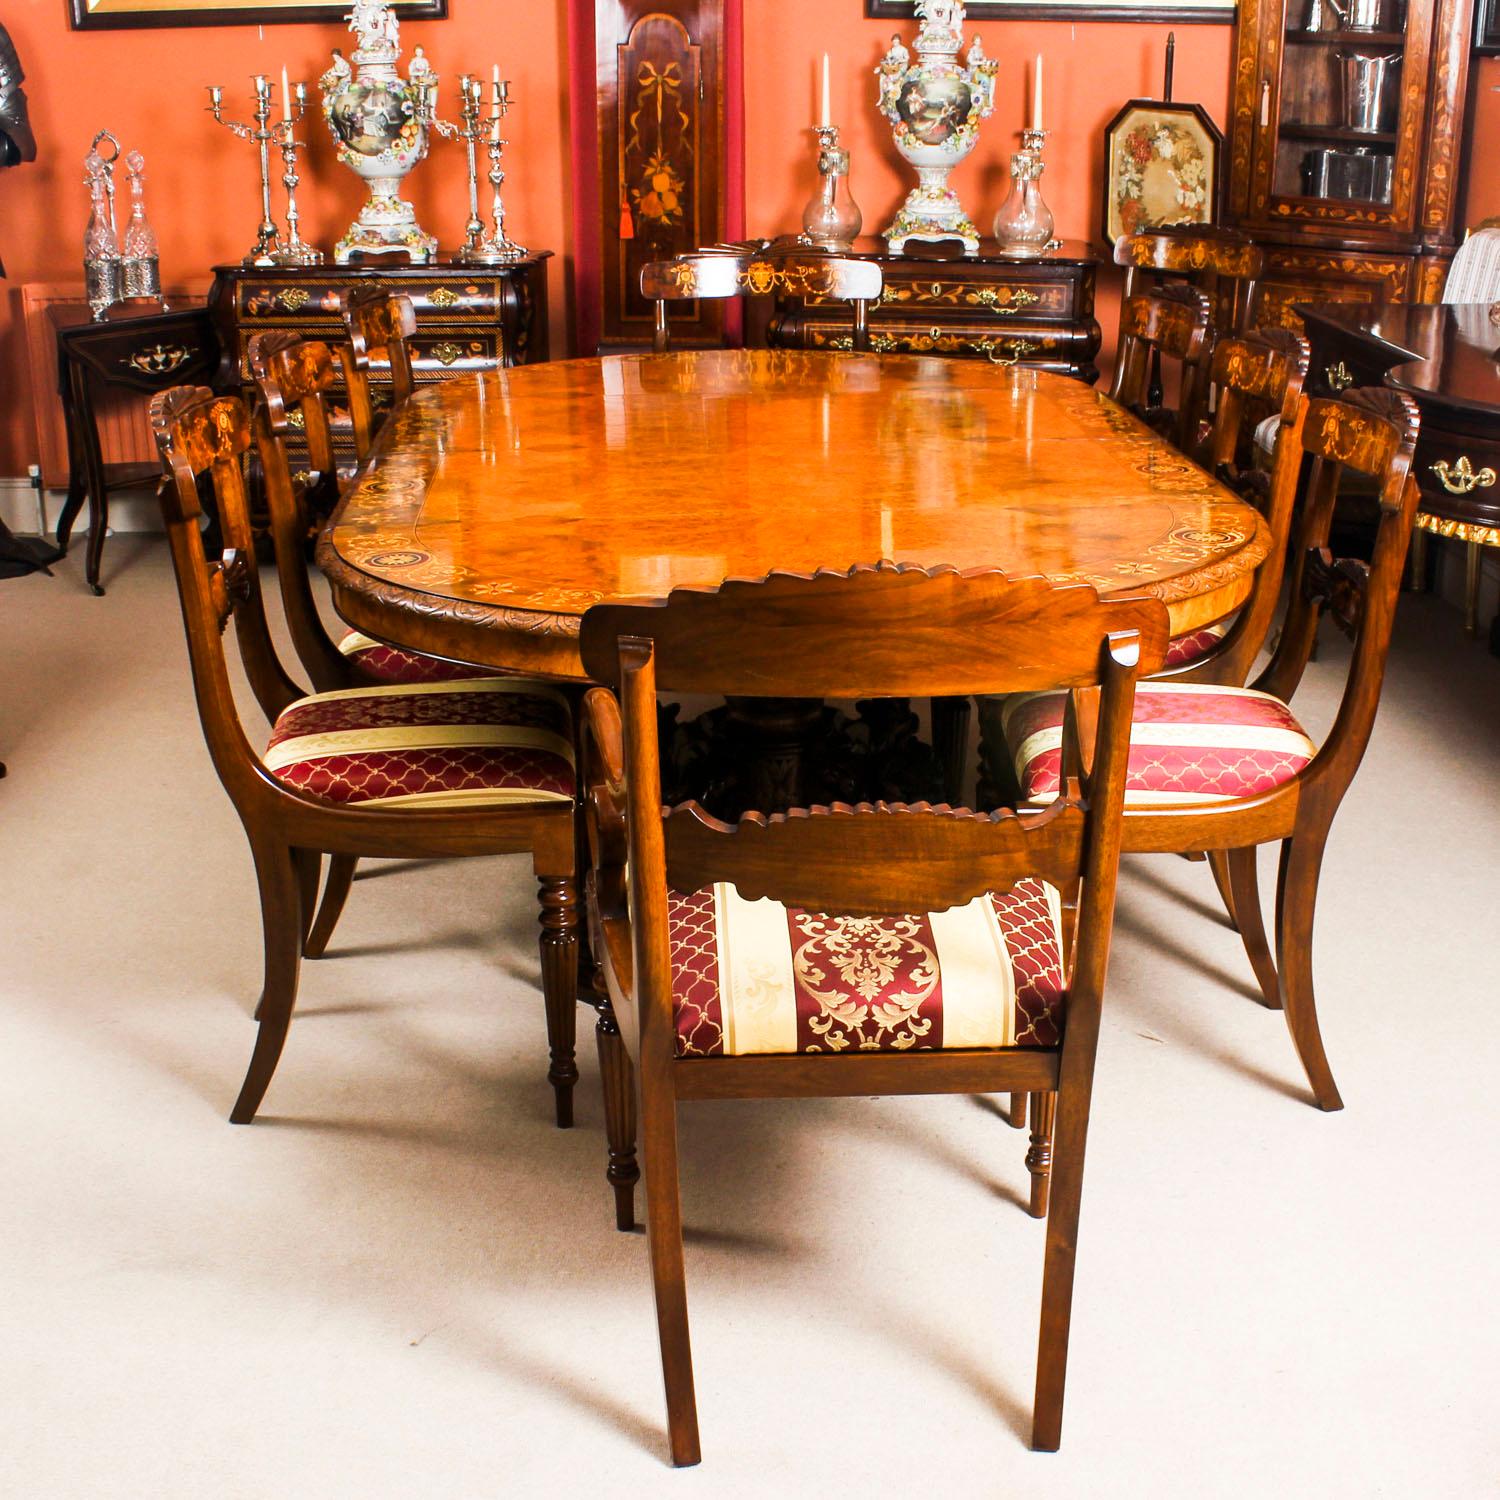 There is no mistaking the style and design of this exquisite Victorian pollard oak and marquetry dining set comprising an extending dining table, circa 1880 in date with eight bespoke marquetry chairs. 

This stunning table has two leaves which